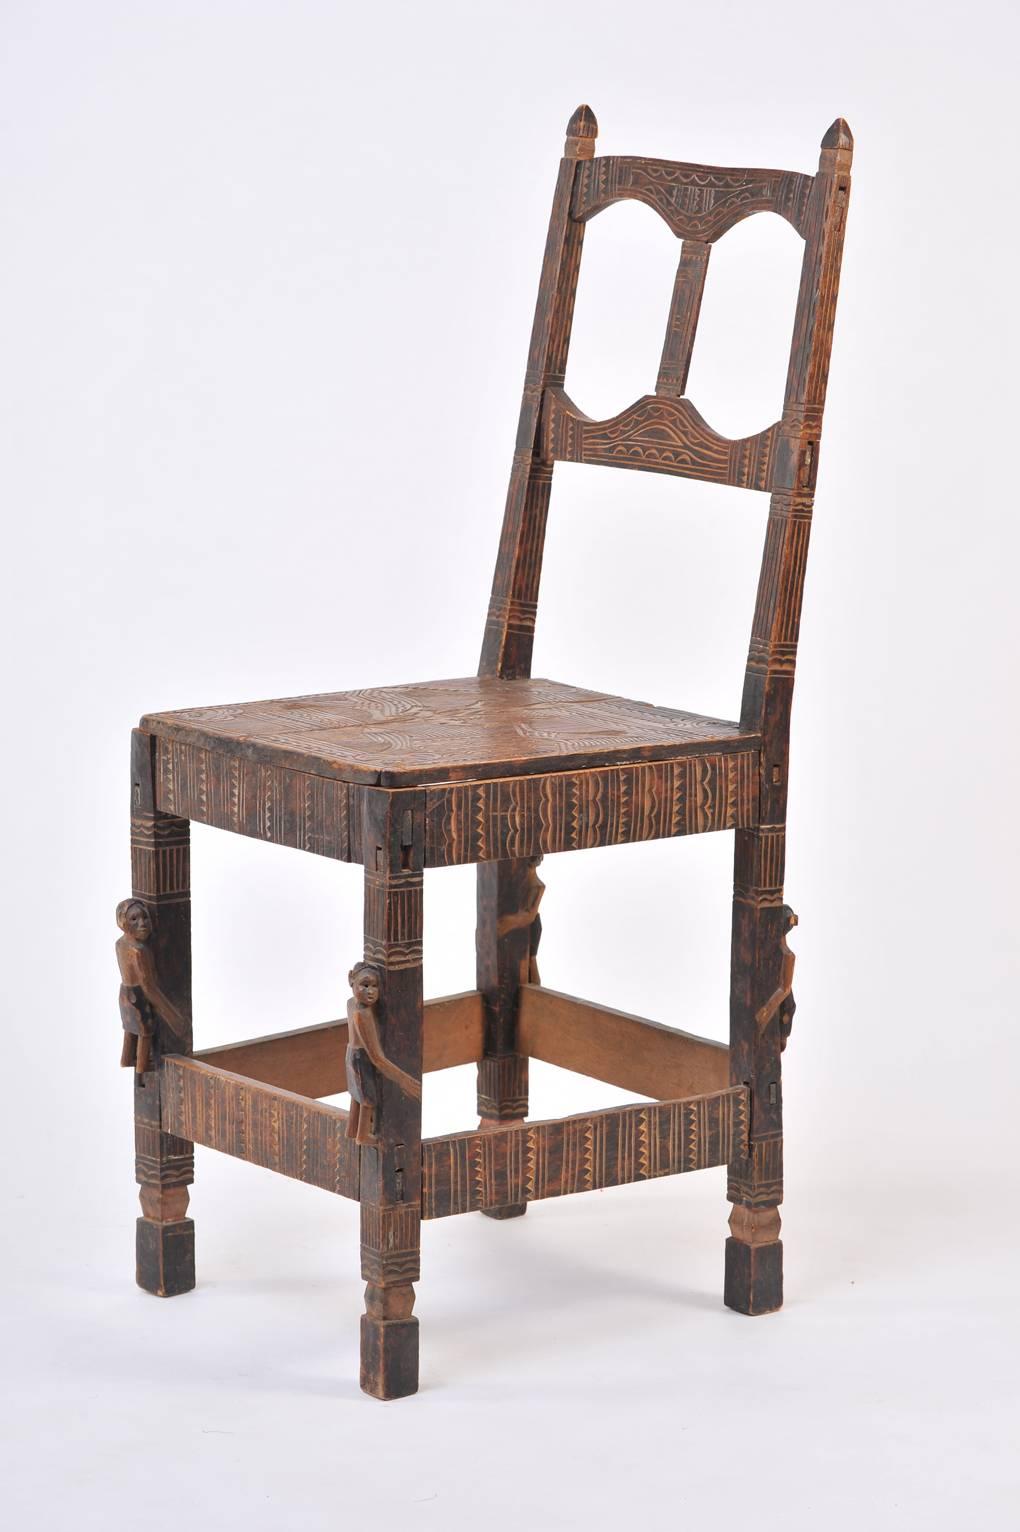 A matched pair of richly carved wood Chokwe chairs.
Congo and Northern Angola, 1940 to 1960.